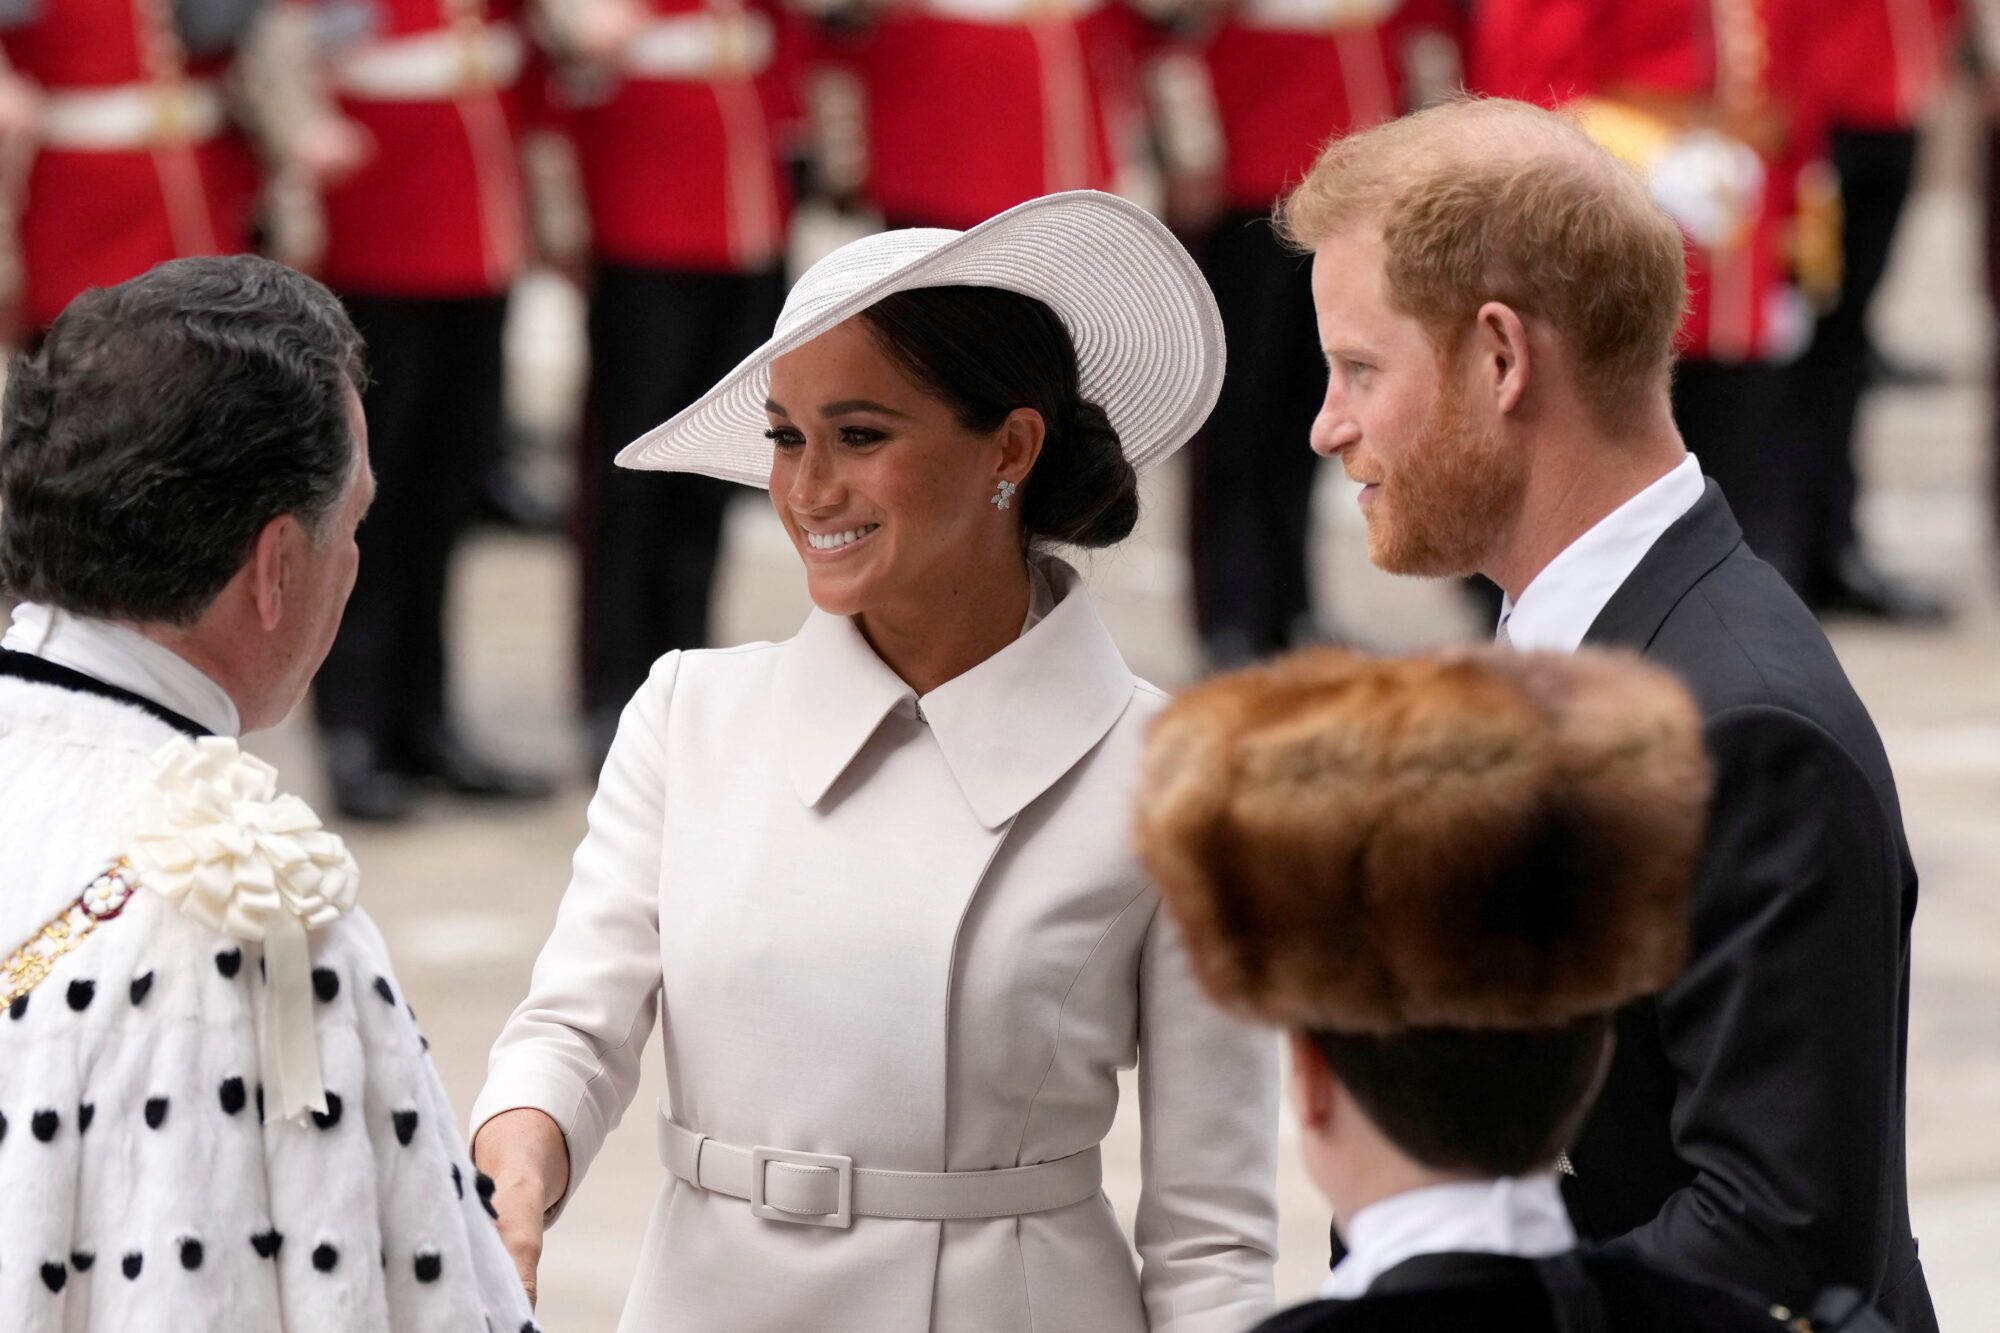 Britain's Prince Harry and Meghan, Duchess of Sussex, are greeted as they arrive for the National Service of Thanksgiving held at St Paul's Cathedral during the Queen's Platinum Jubilee celebrations in London, Britain, June 3, 2022. Matt Dunham/Pool via REUTERS